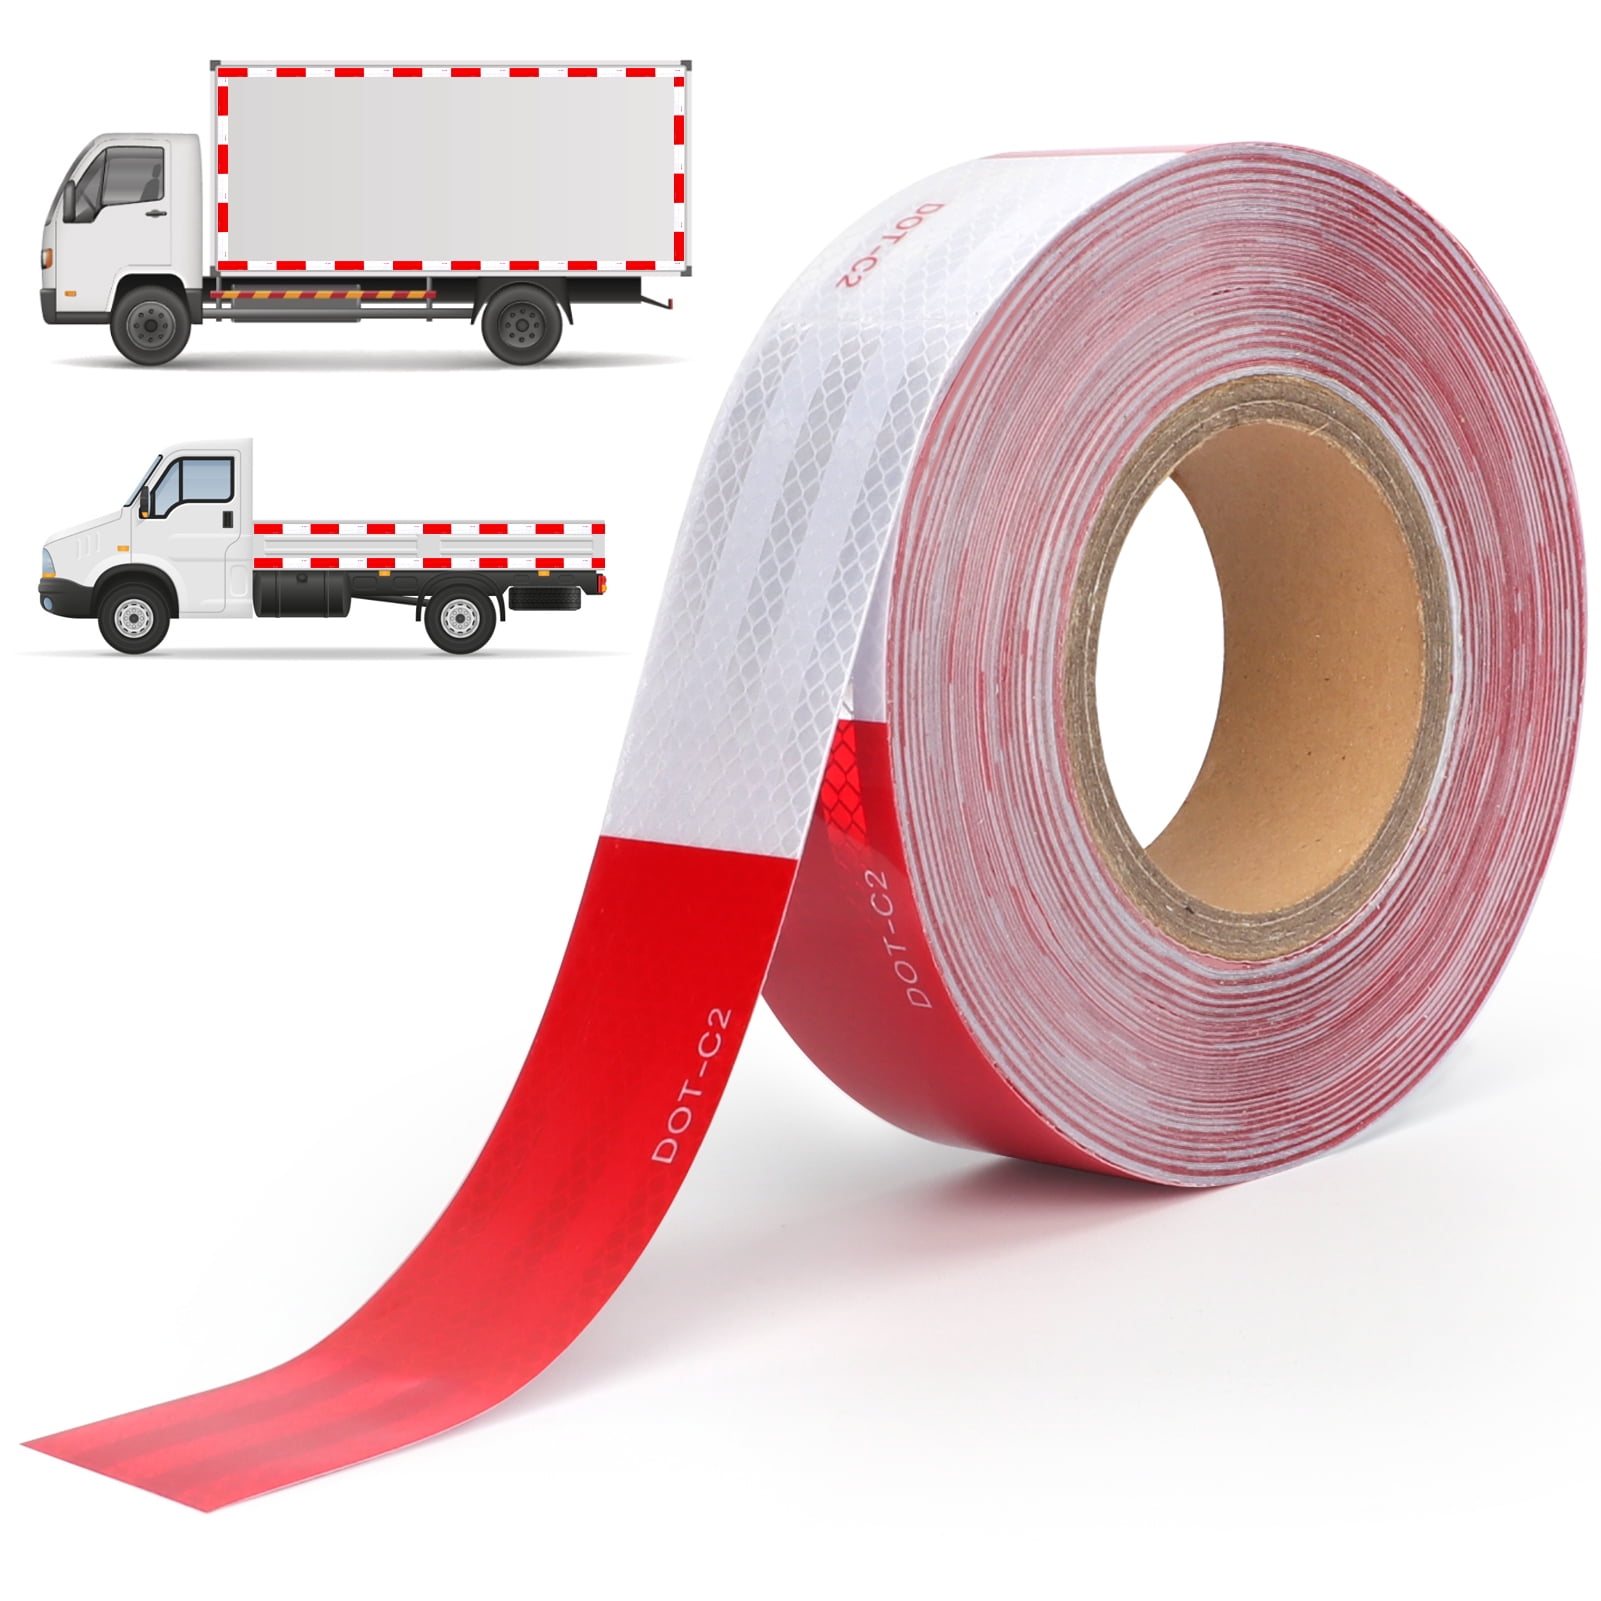 THKULKME DOT-C2 Reflective Tape 2 inch x 100 Feet Red White Reflector Adhesive Conspicuity Outdoor Waterproof Tape for Trailers, Trucks, Vehicles